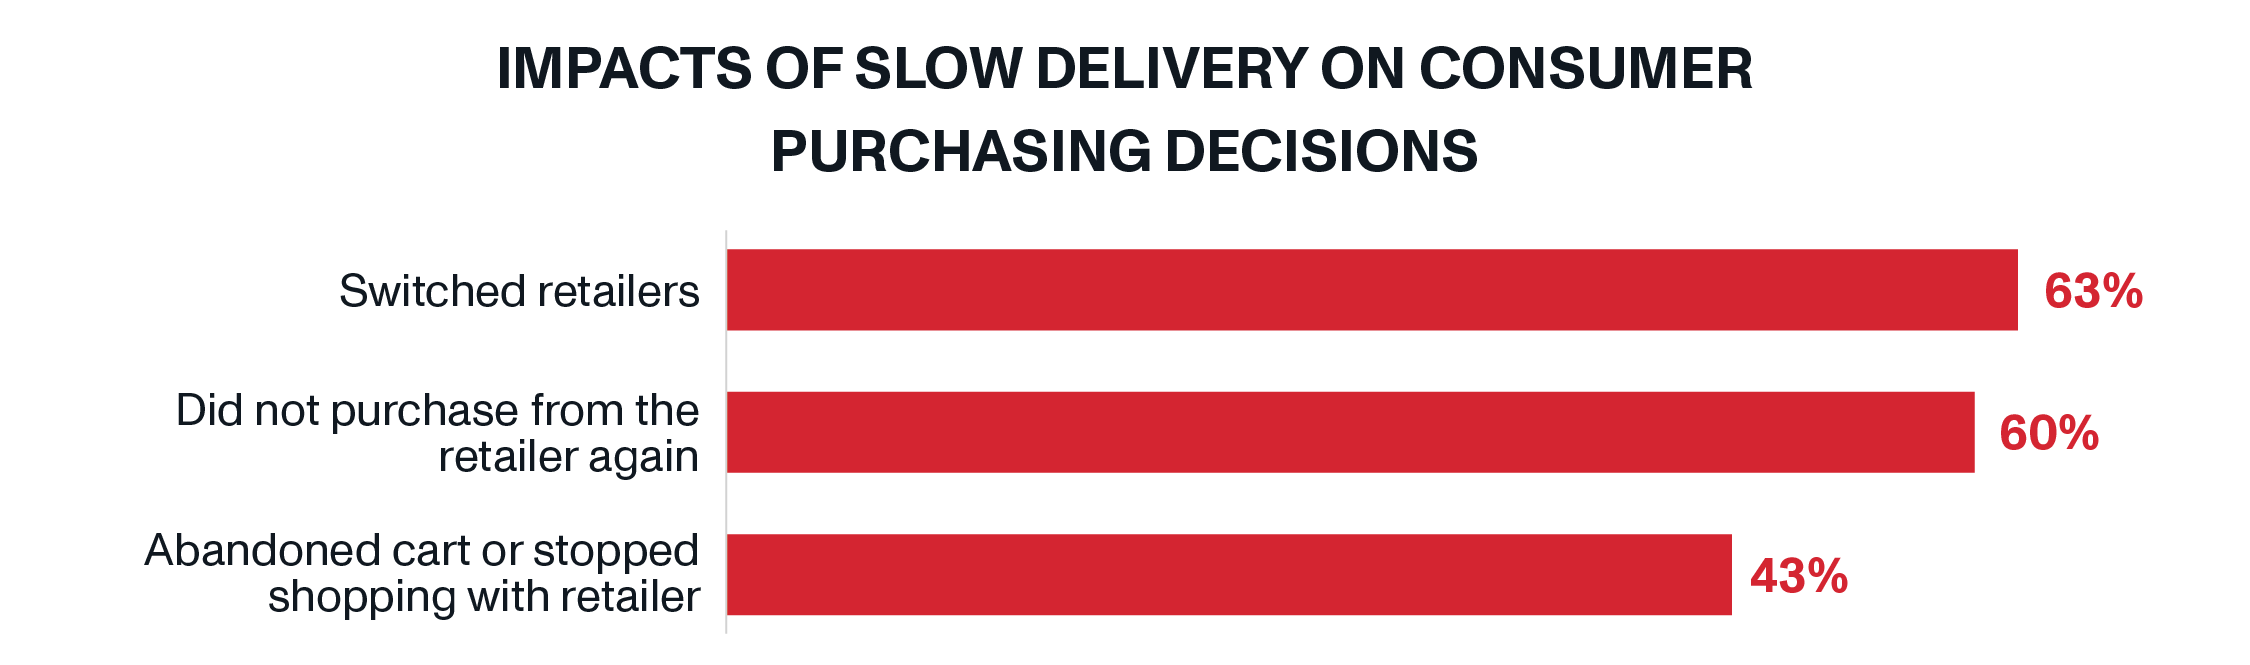 Slow delivery has caused 63% of consumers to switch retailers, 60% to not purchase again from a retailer, and 43% to abandon their carts or stop shopping with that retailer.